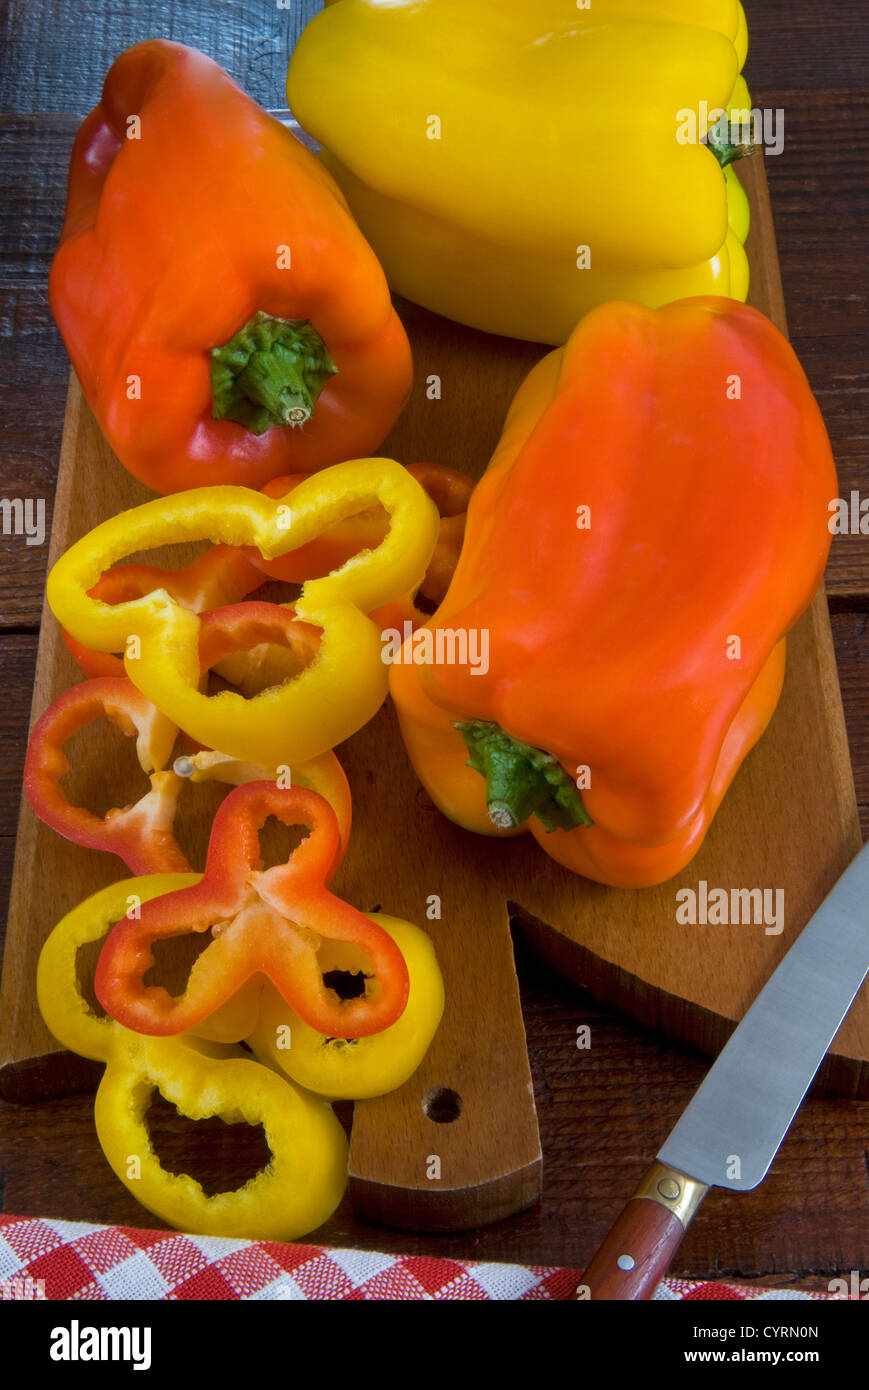 Yellow and red peppers or bell pepper, or sweet pepper Stock Photo